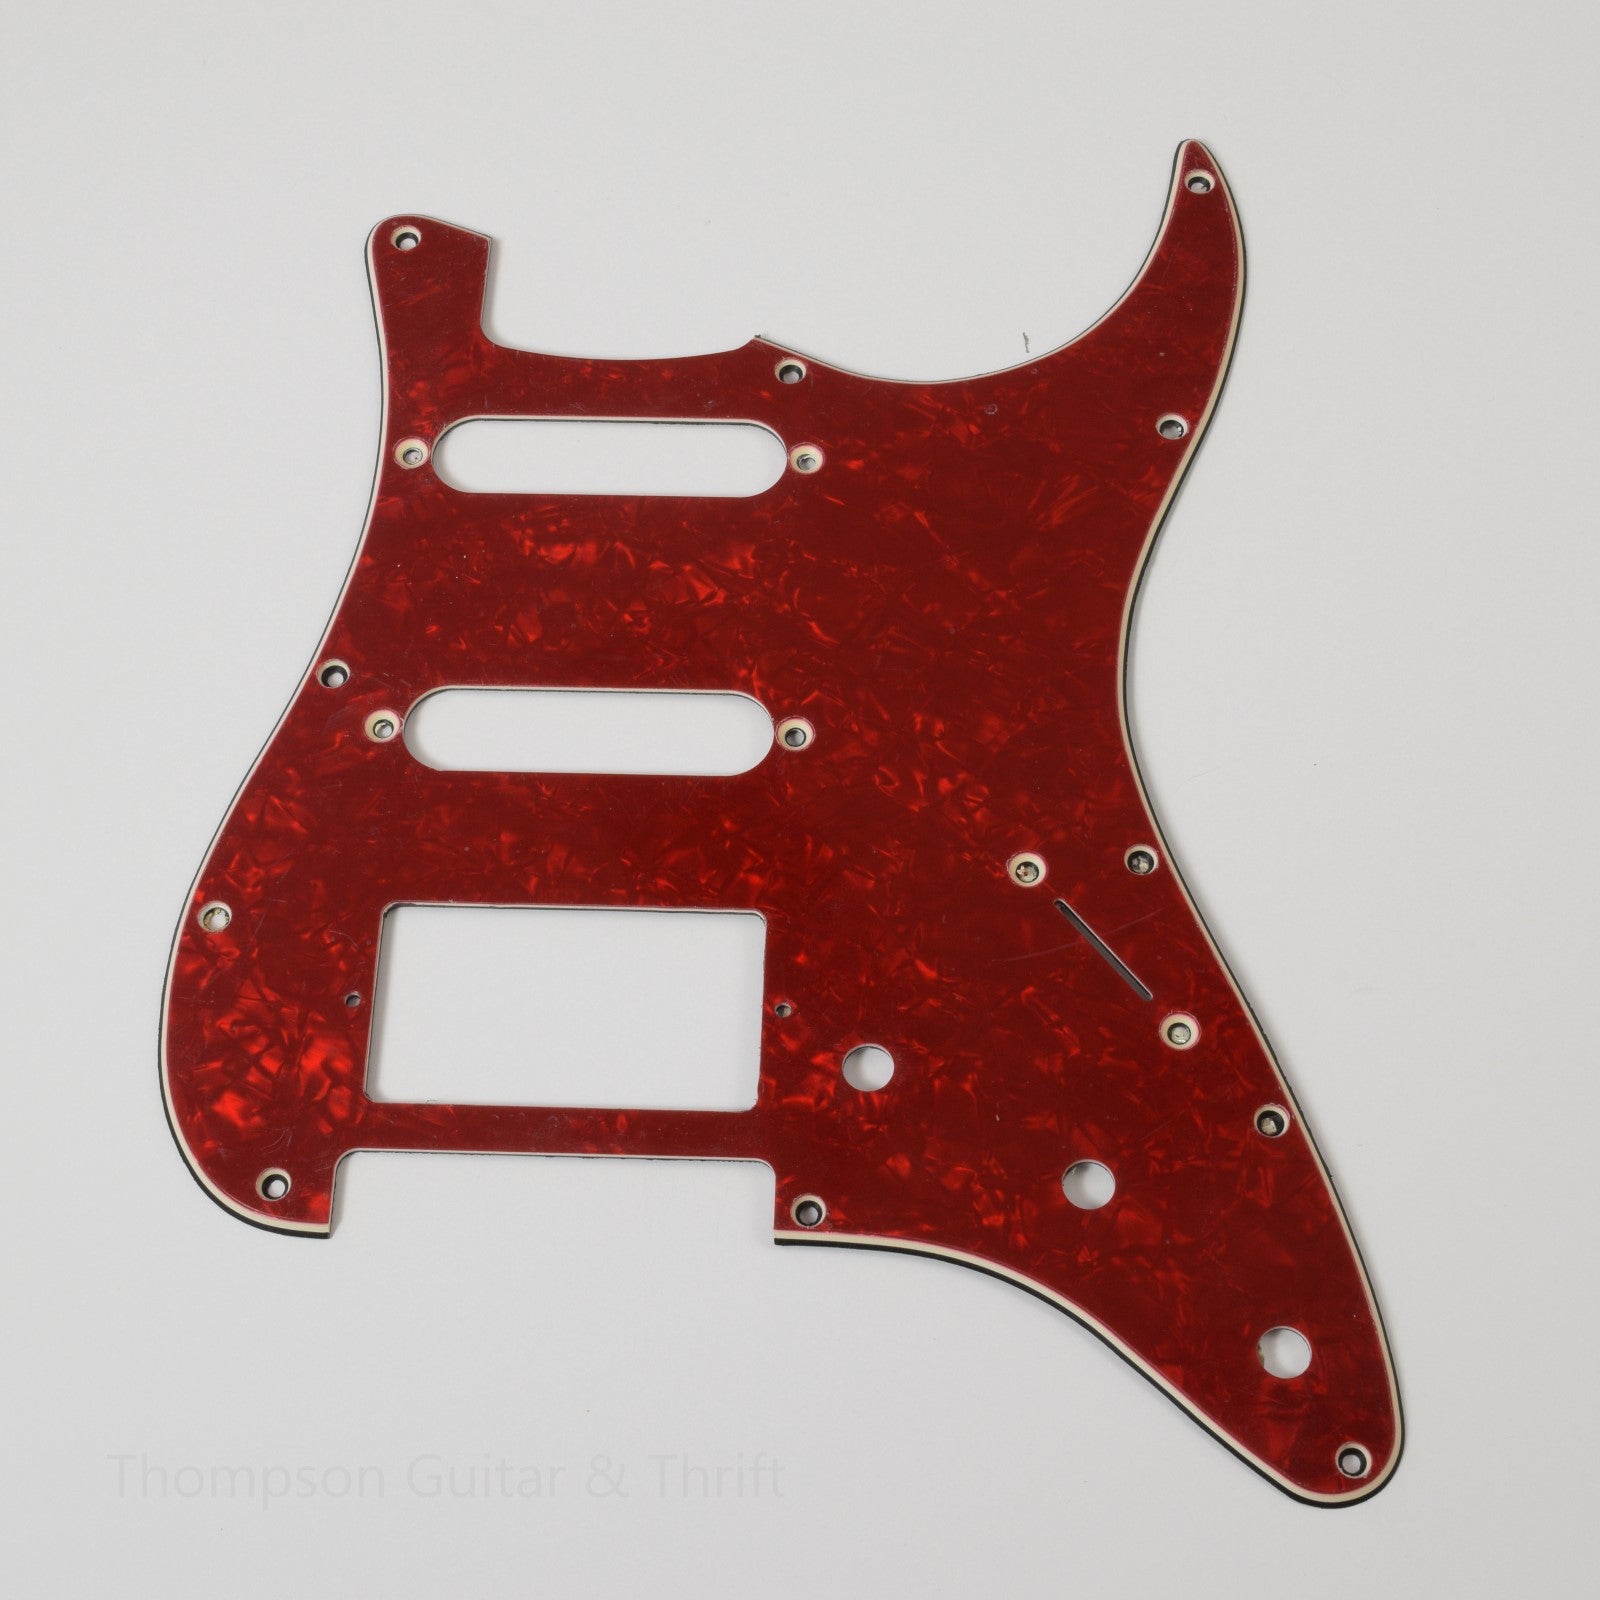 Red Pearloid Strat Style Pickguard 11-Screw HSS 3-Knob 2-Ply (Closeout)